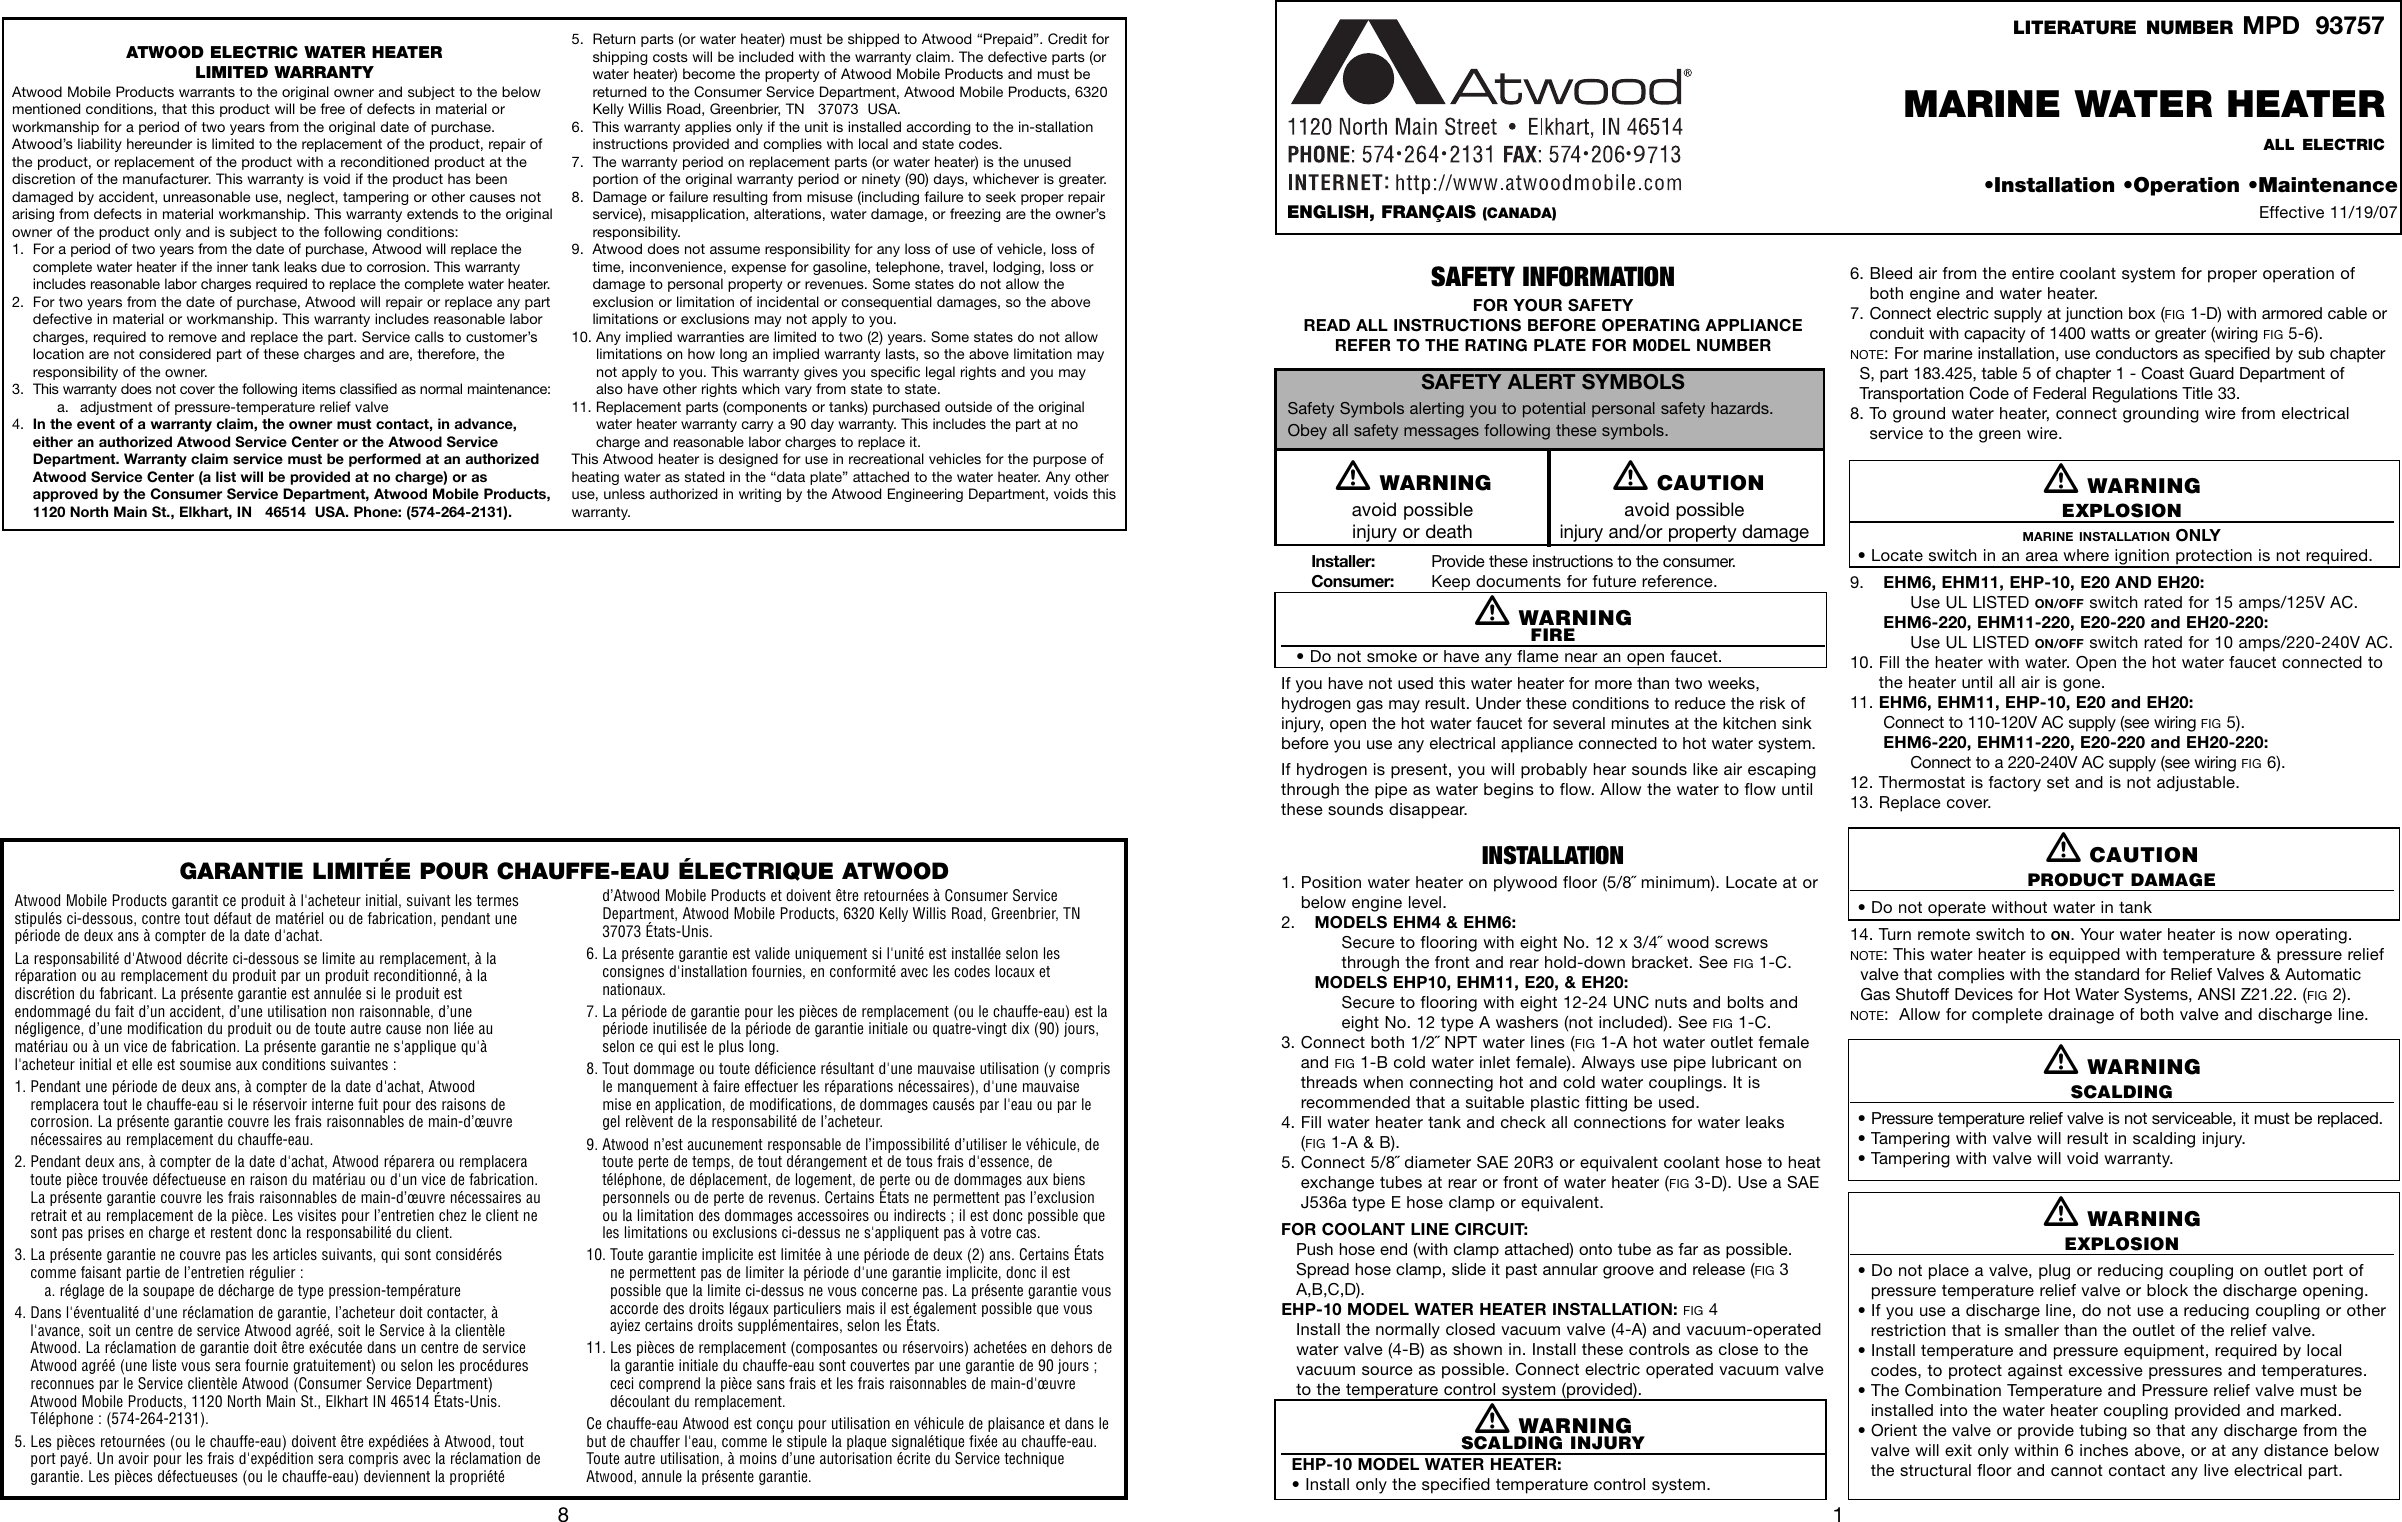 Page 1 of 4 - Atwood-Mobile-Products Atwood-Mobile-Products-E20-Users-Manual- MPD 93757 7.29.04  Atwood-mobile-products-e20-users-manual